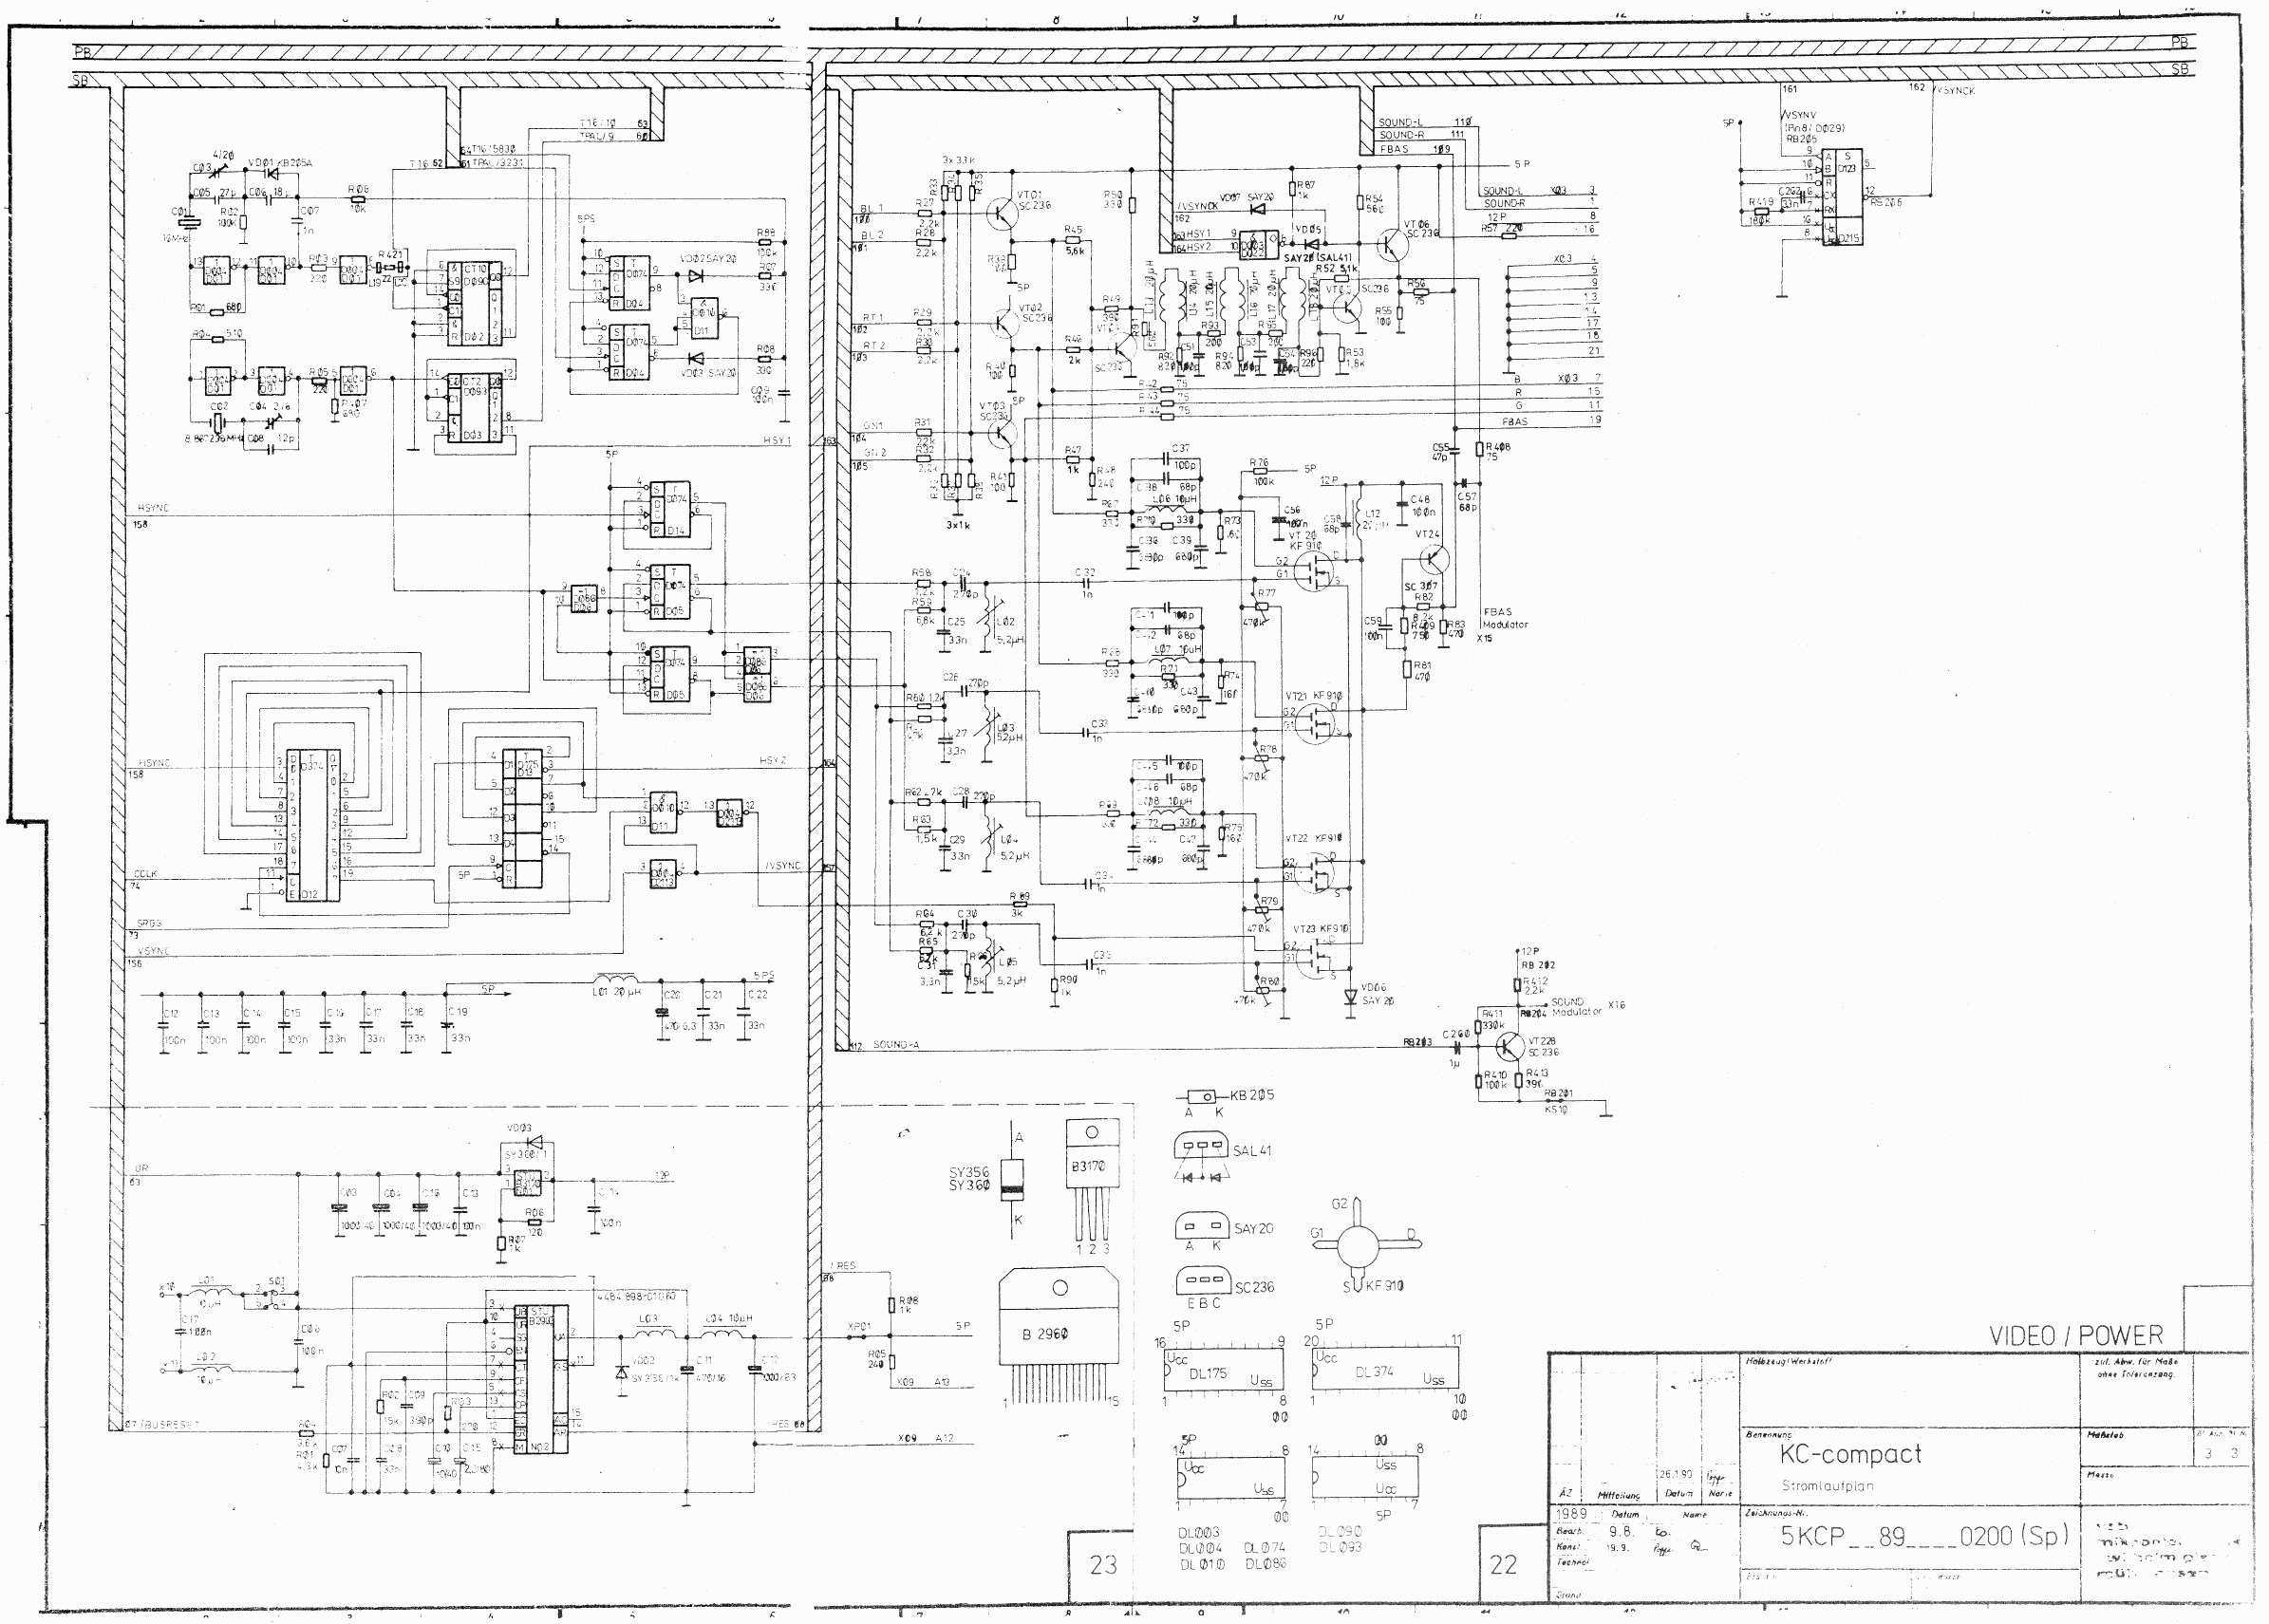 Schematic (Video and Power)